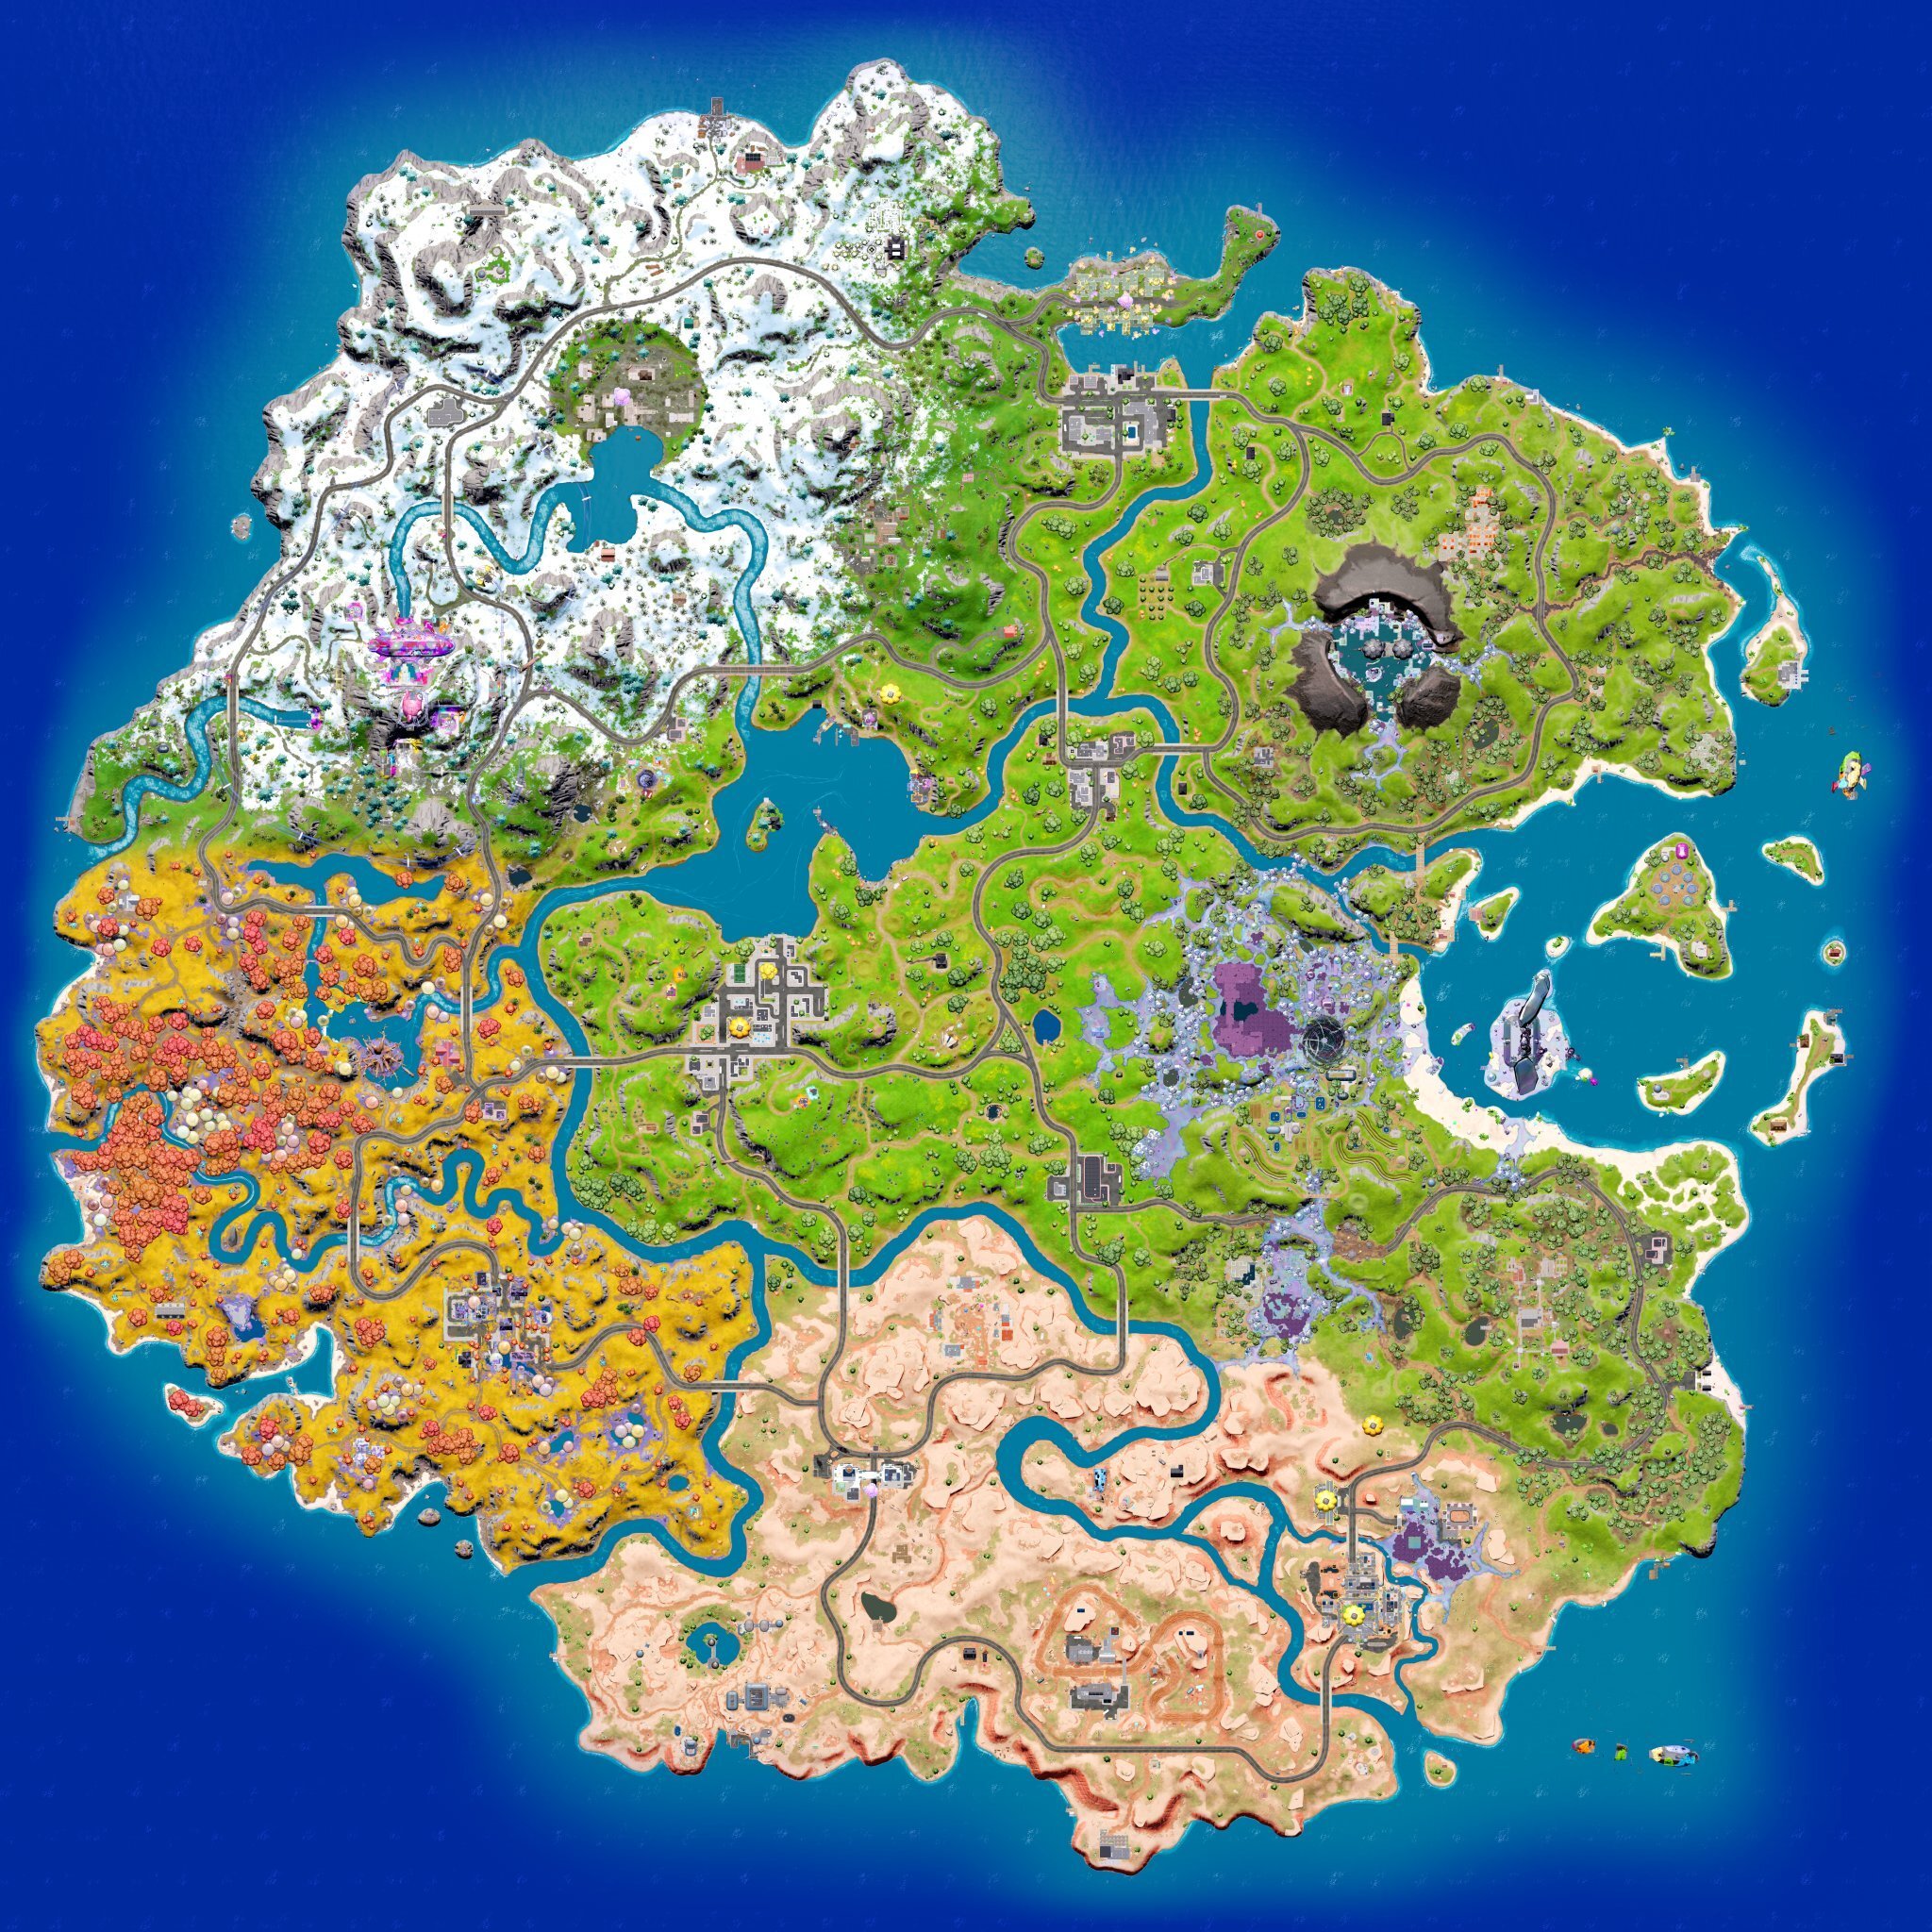 What is the name of the map after it flipped?